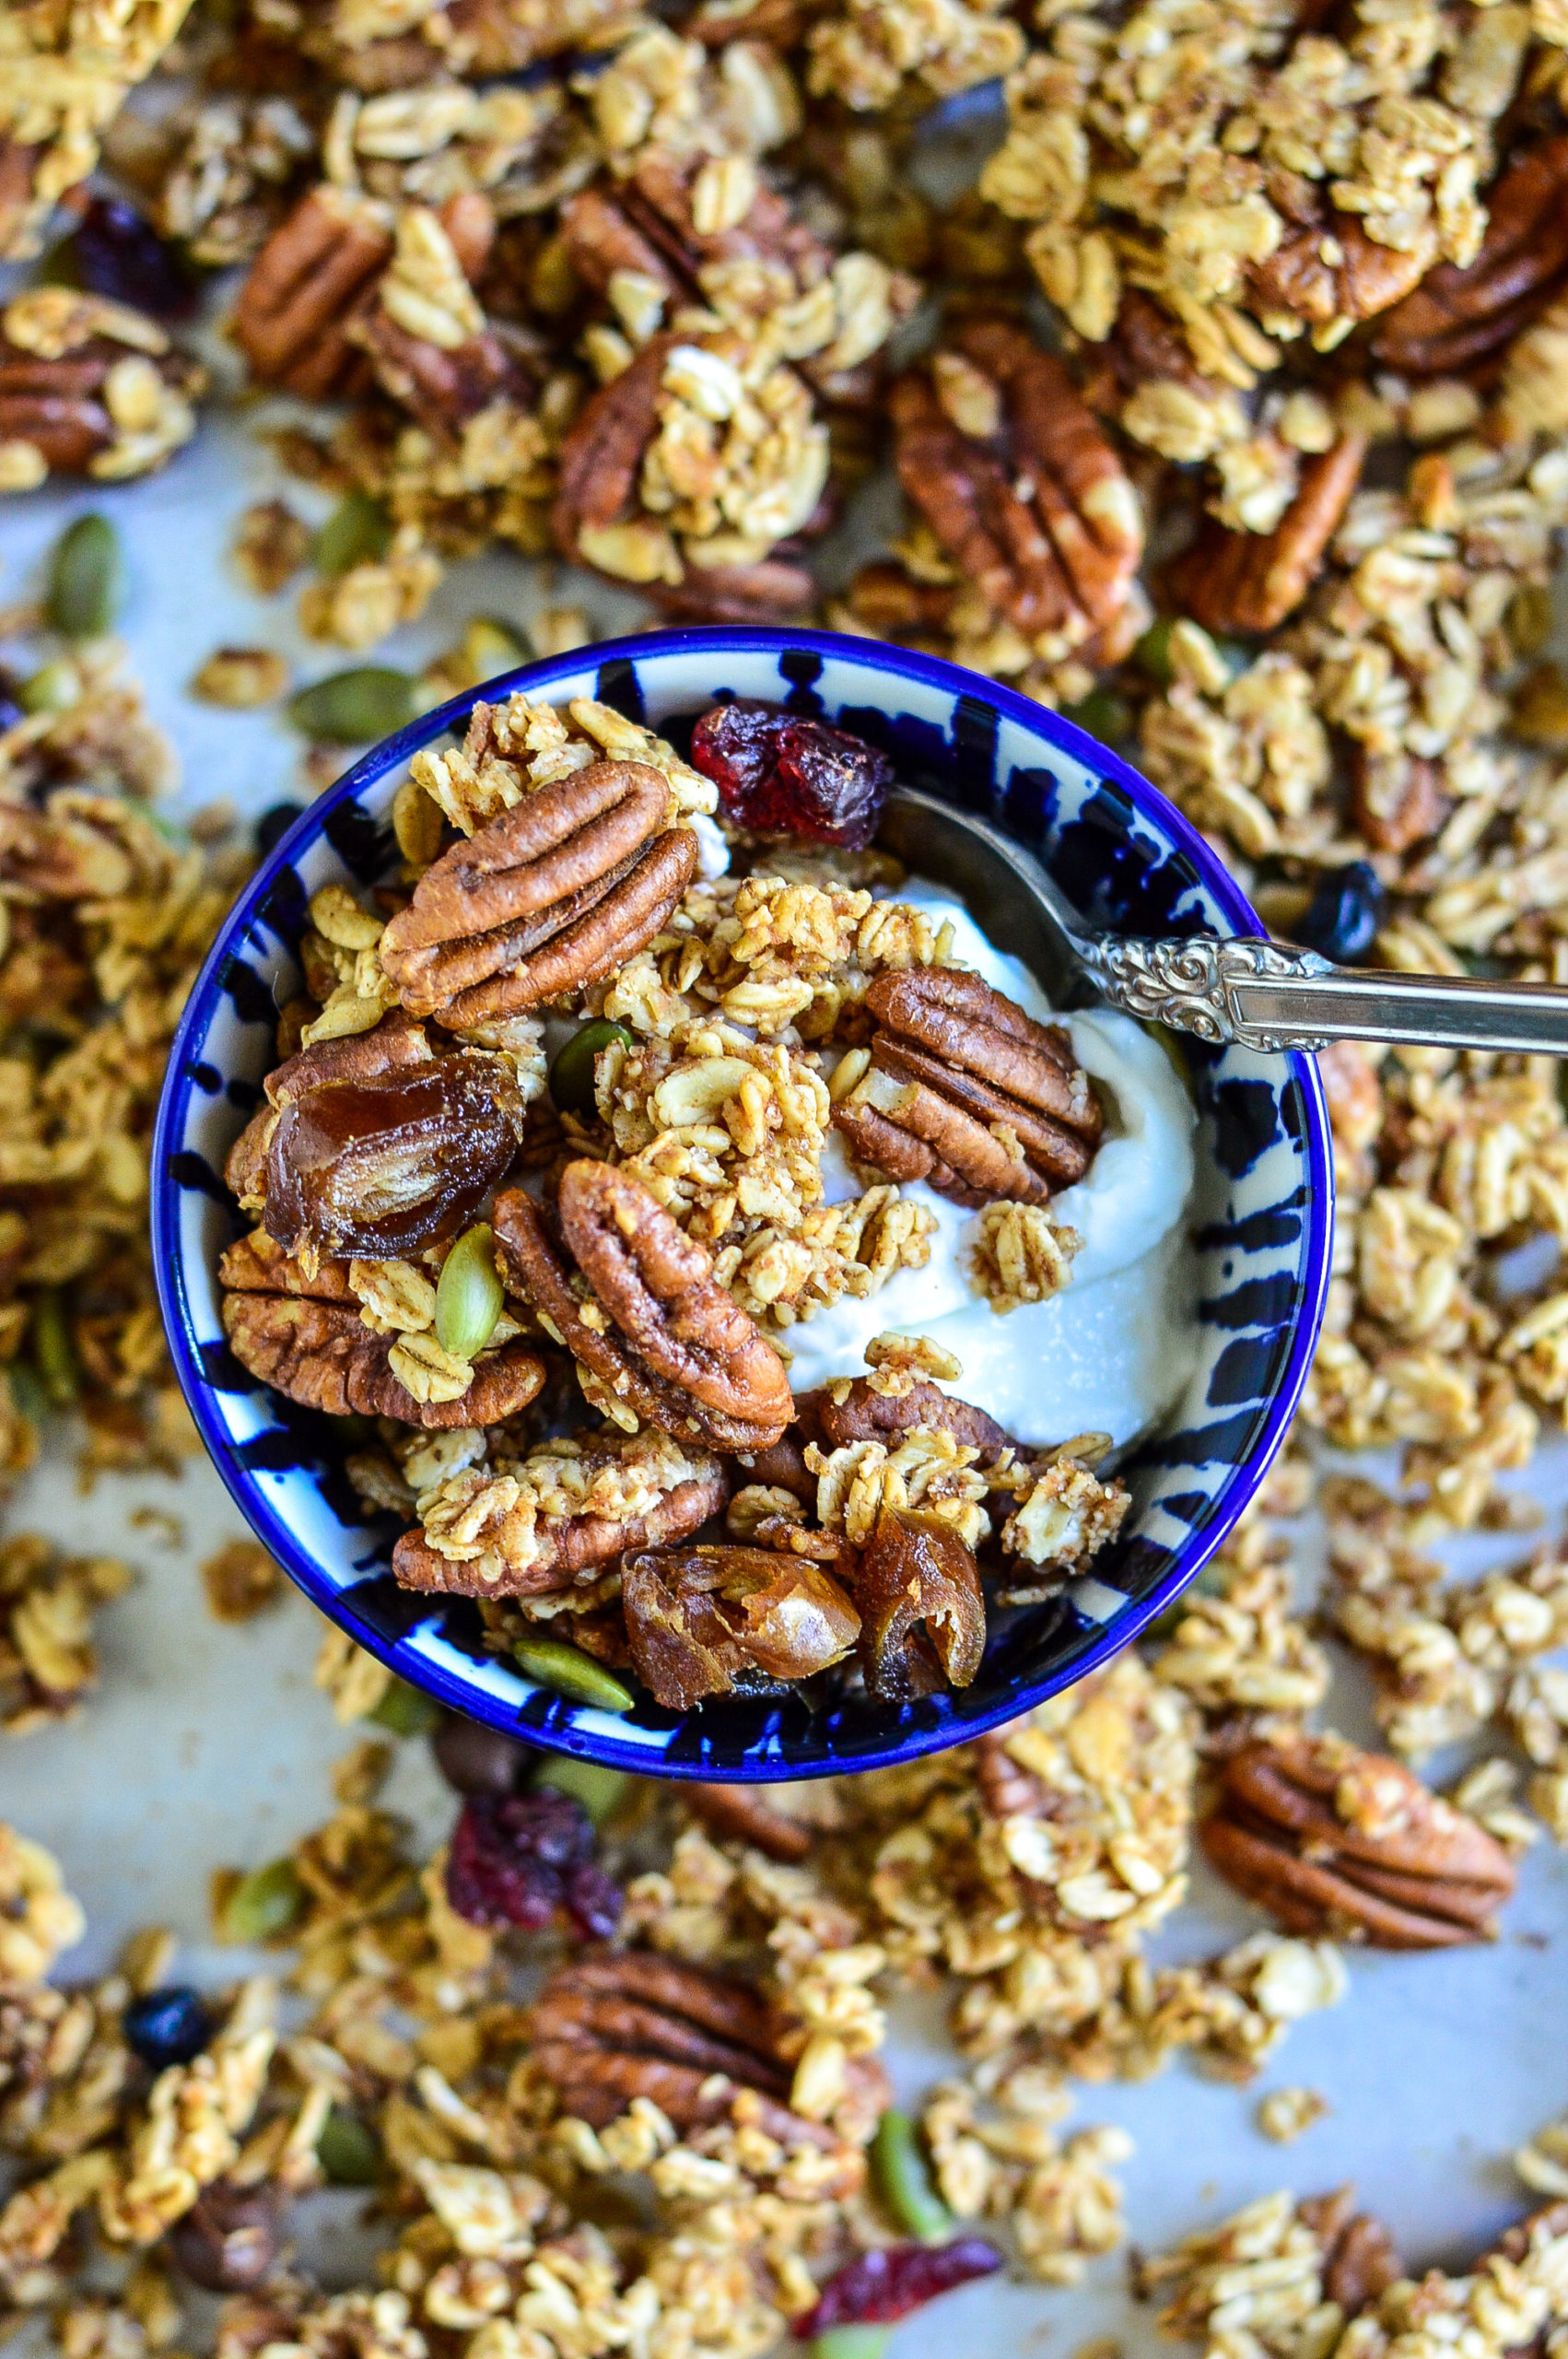 https://www.realfoodwithdana.com/wp-content/uploads/2021/04/Pecan-French-Toast-Granola-Copyright-Dana-Monsees-MS-CNS-LDN-4-1-scaled.jpg